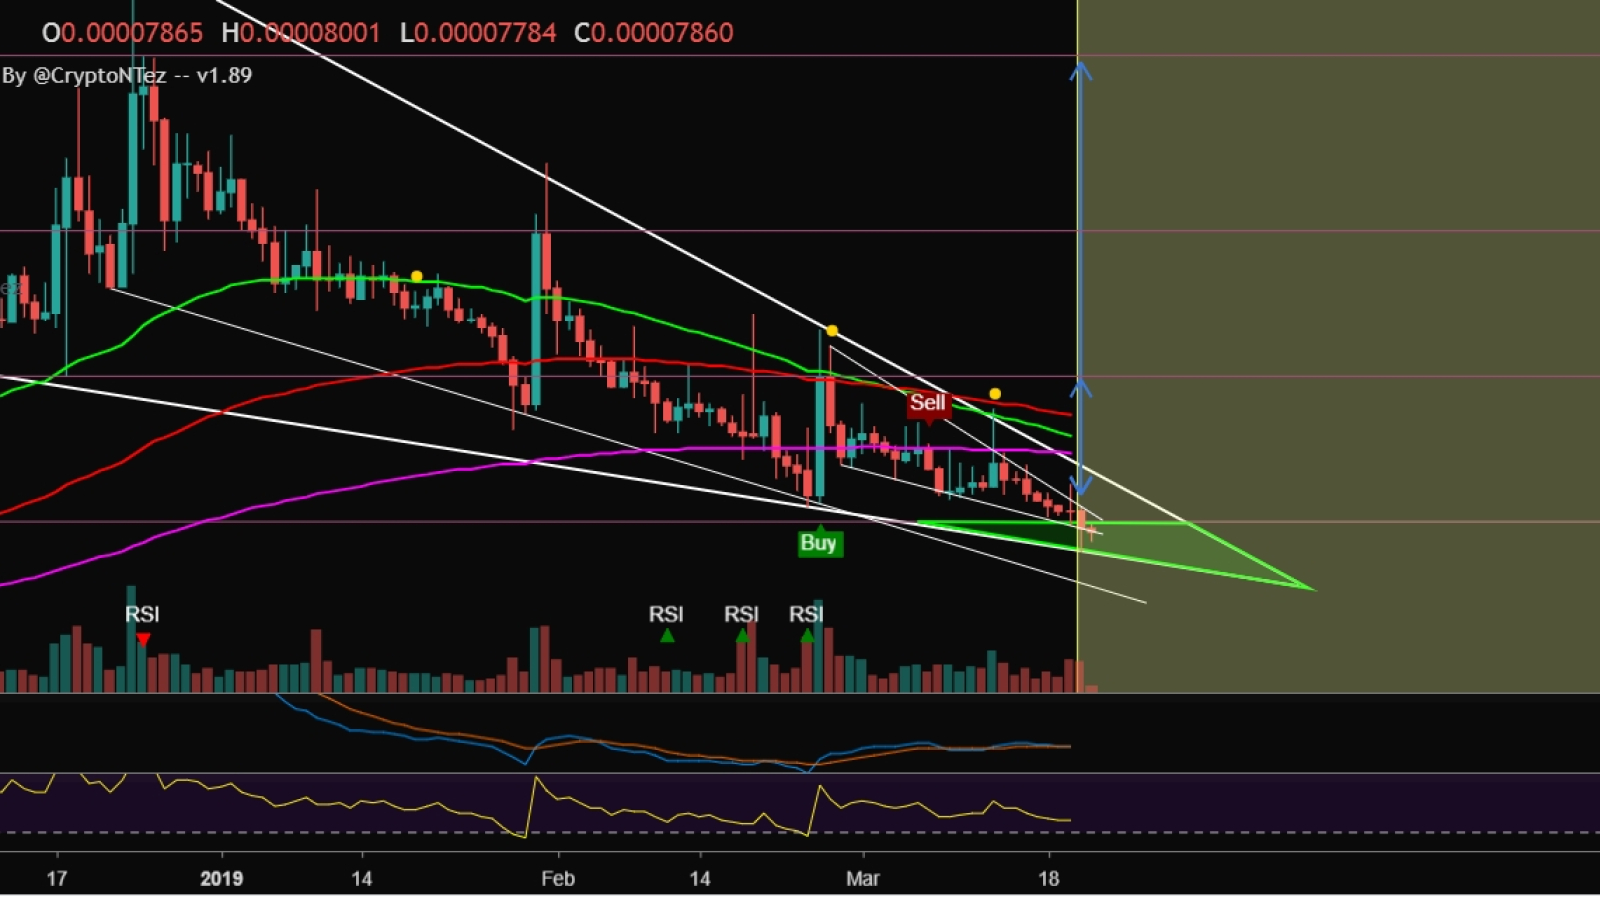 Ripple price chart from CryptoNTez shows a falling wedge